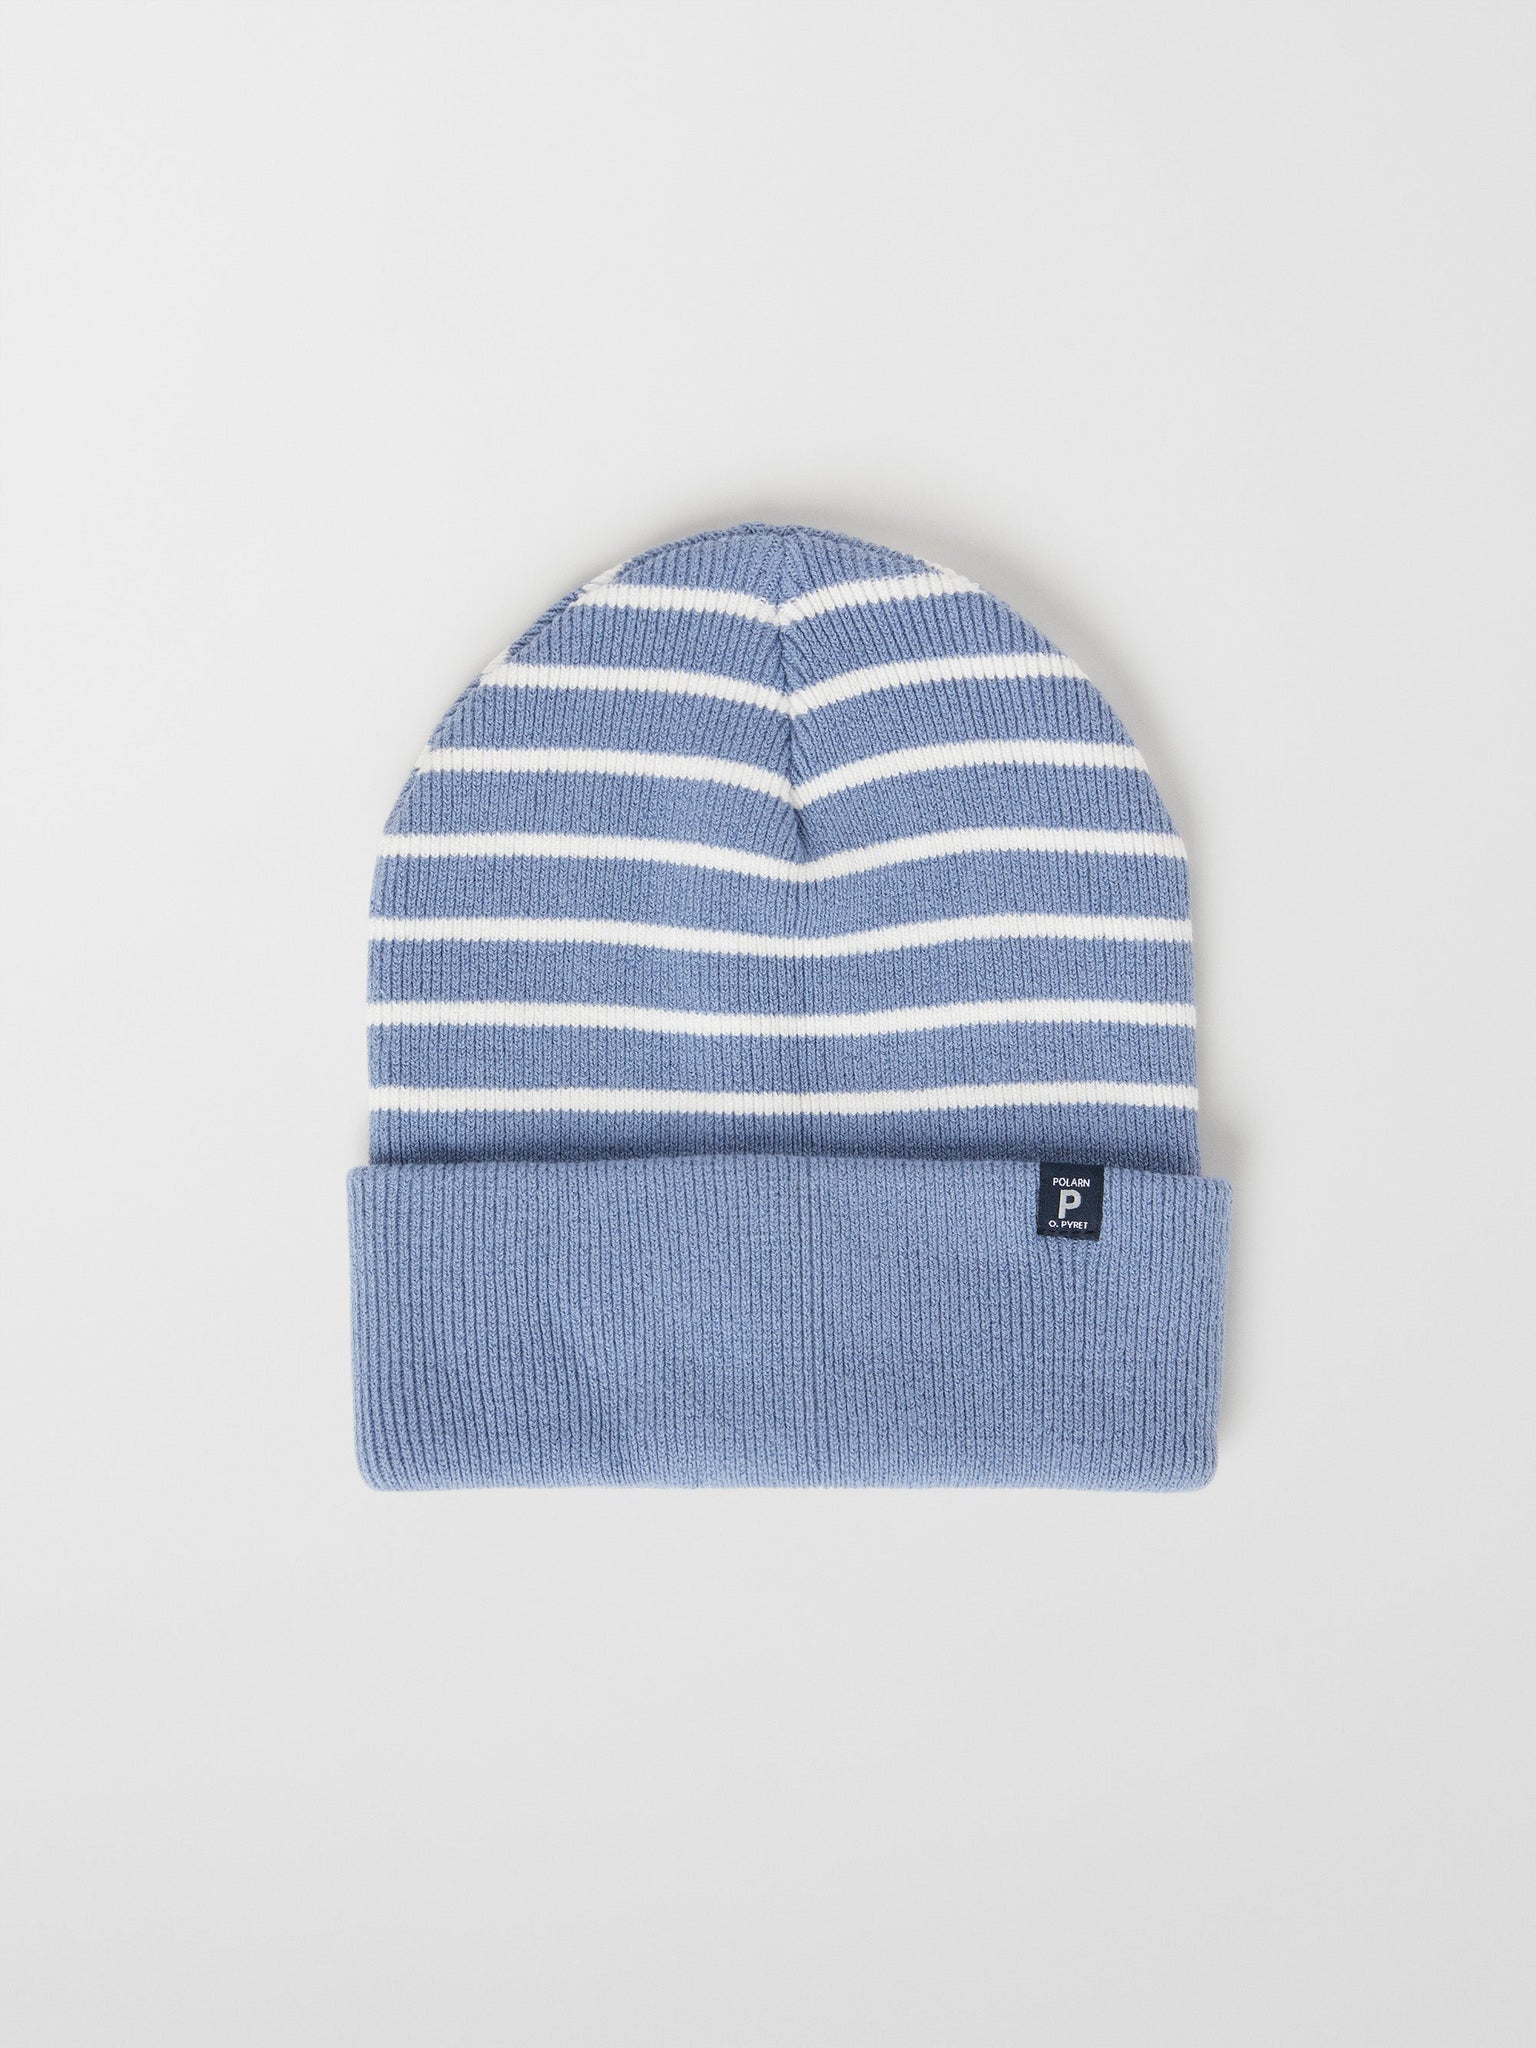 Ribbed Purple Kids Beanie Hat from the Polarn O. Pyret outerwear collection. Ethically produced kids outerwear.